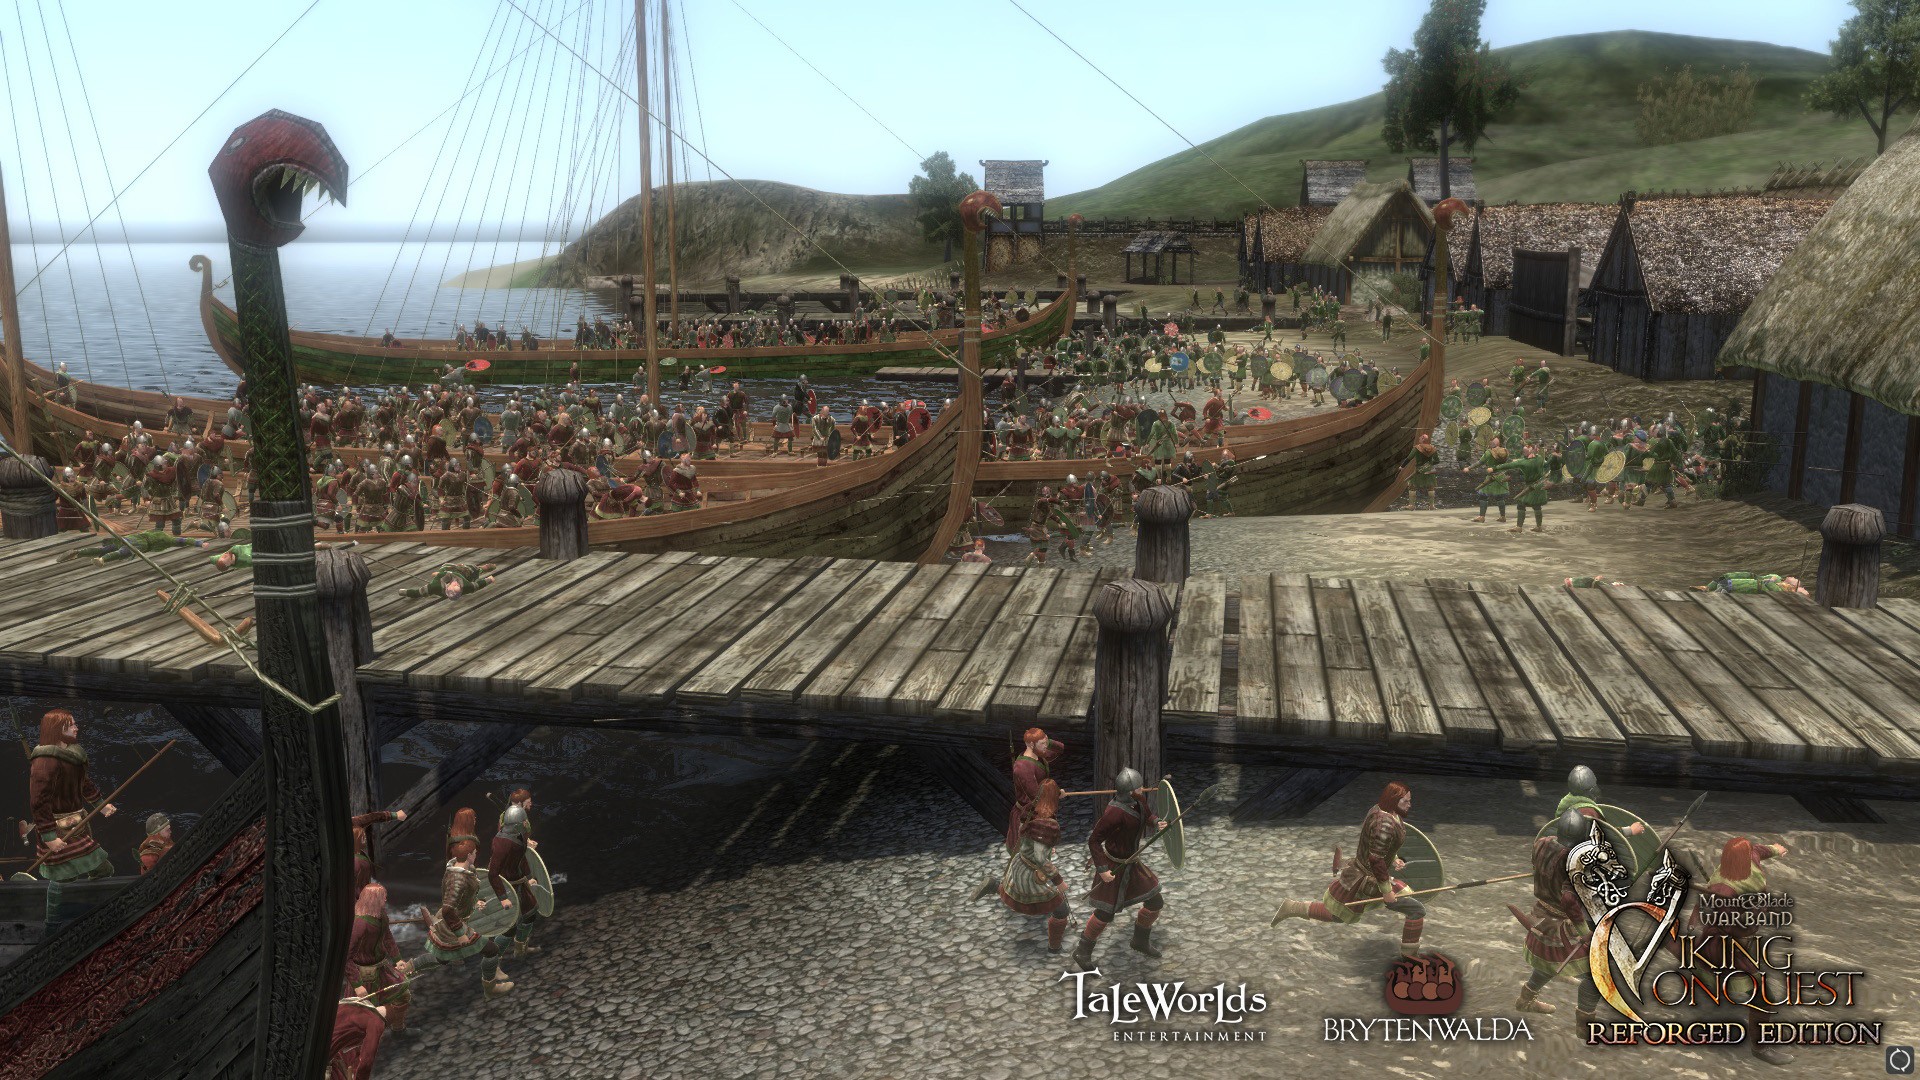 mount and blade viking conquest companion guide